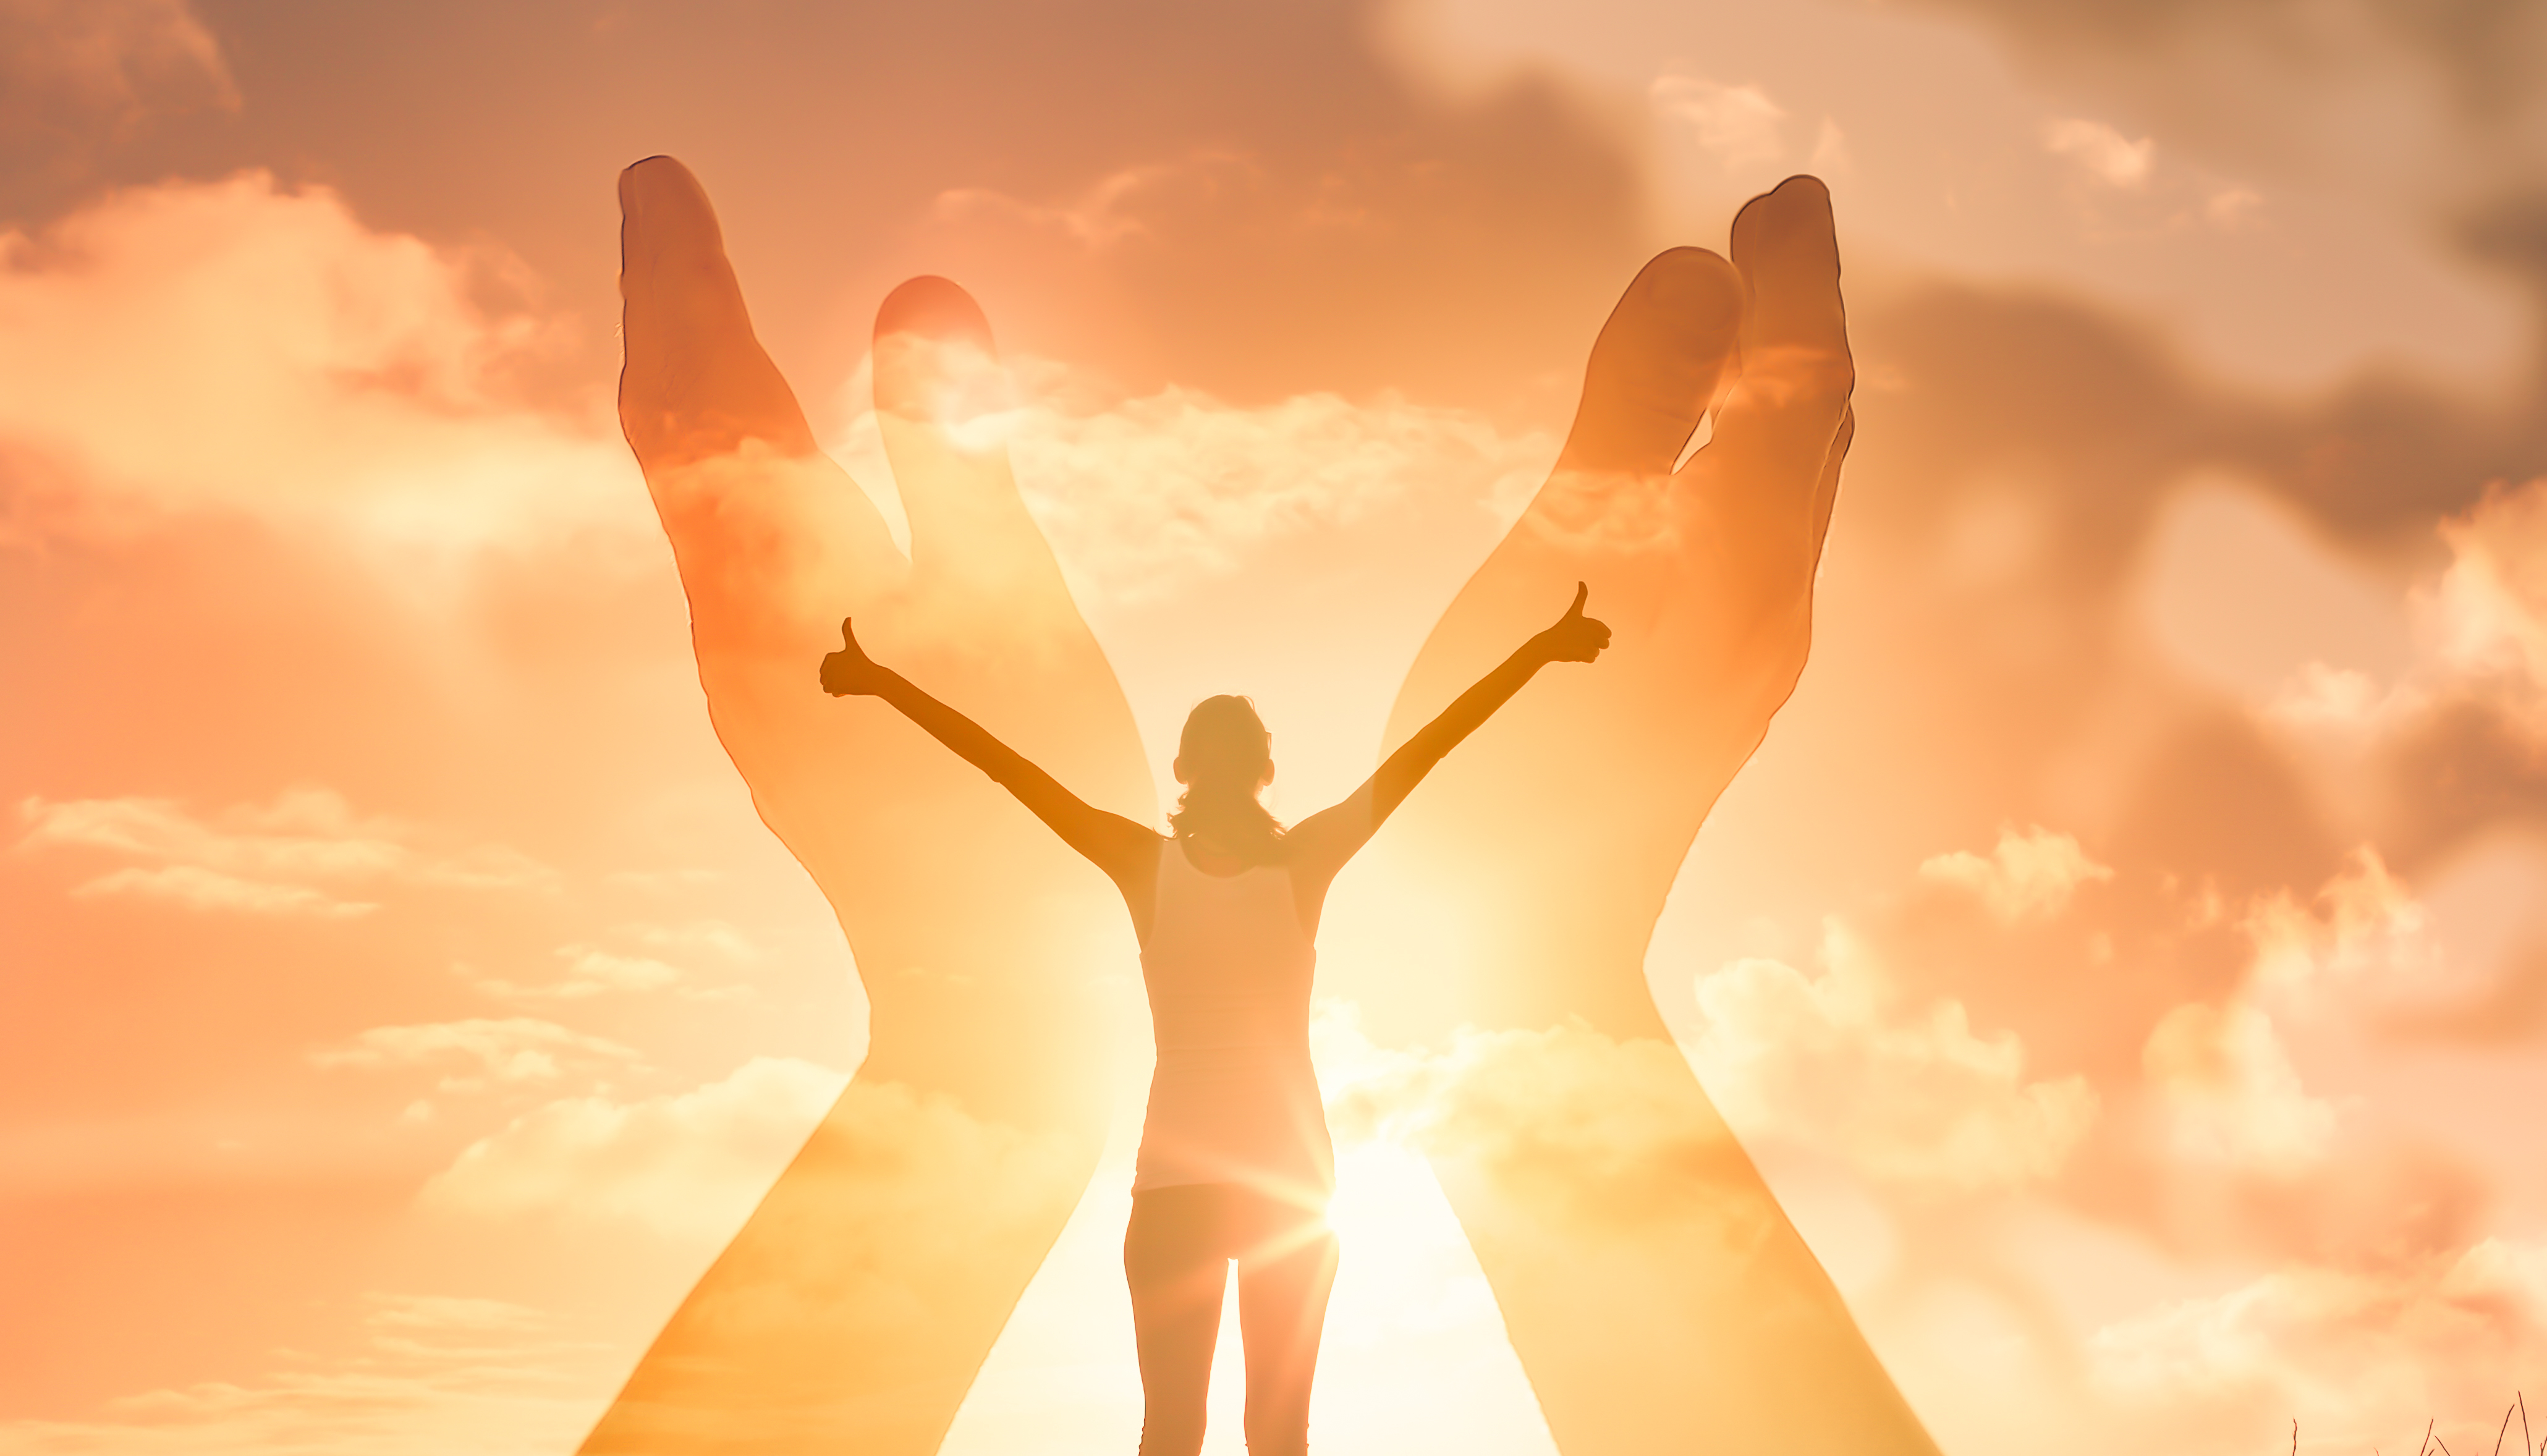 A woman stood in front of the sun with her arms up to the sky and thumbs up, with two large hands in front of her, with the palms up to the sky